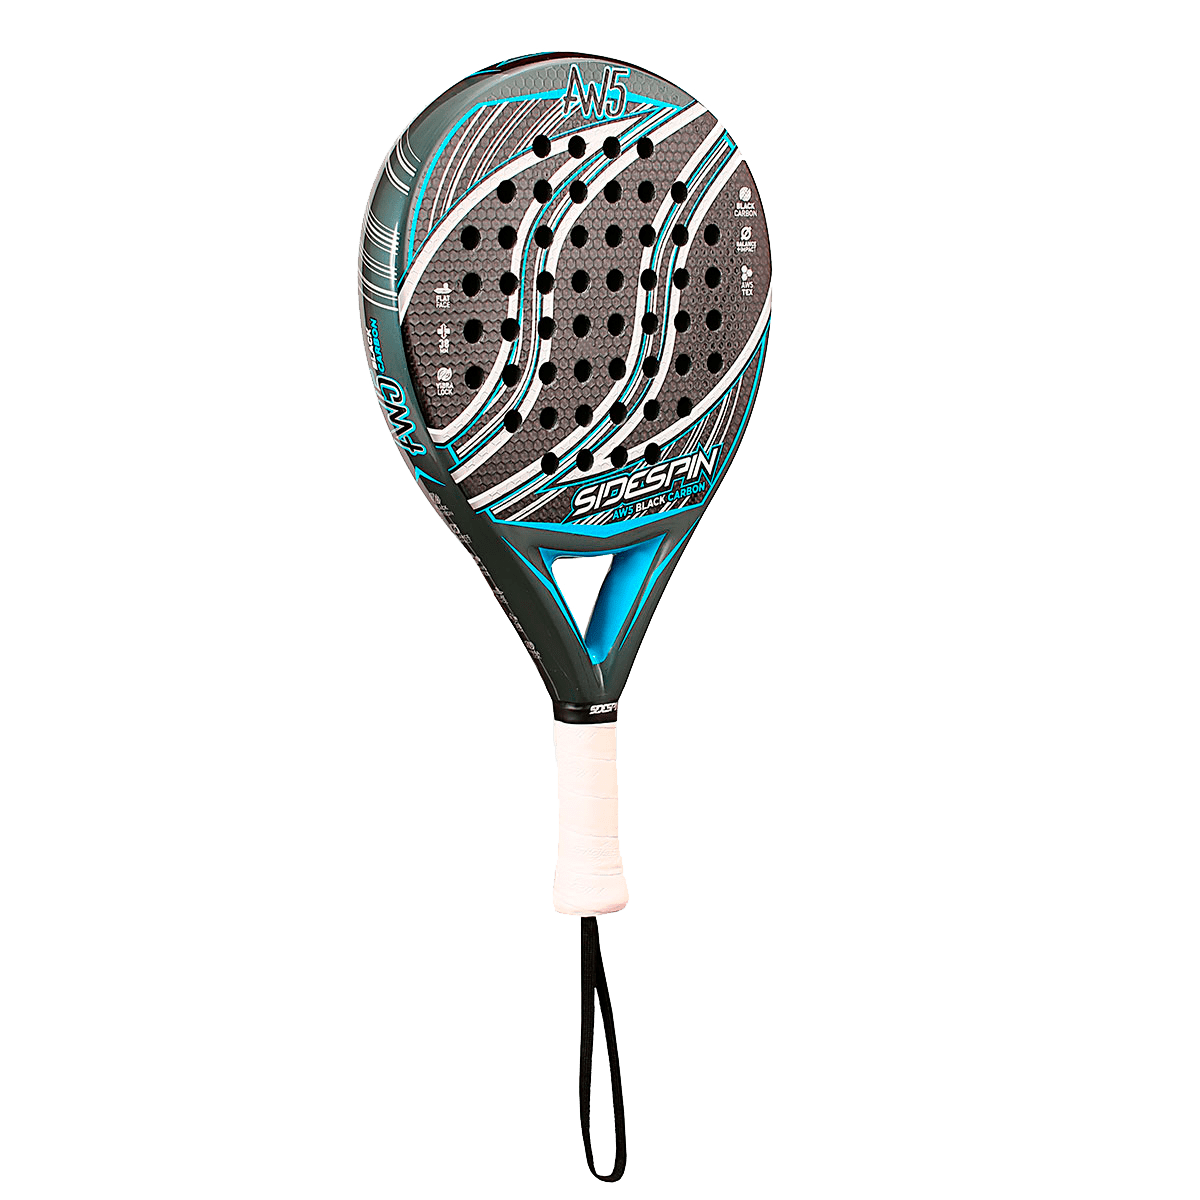 SIDE SPIN AW5 FULL CARBON 3K TEX – BLU